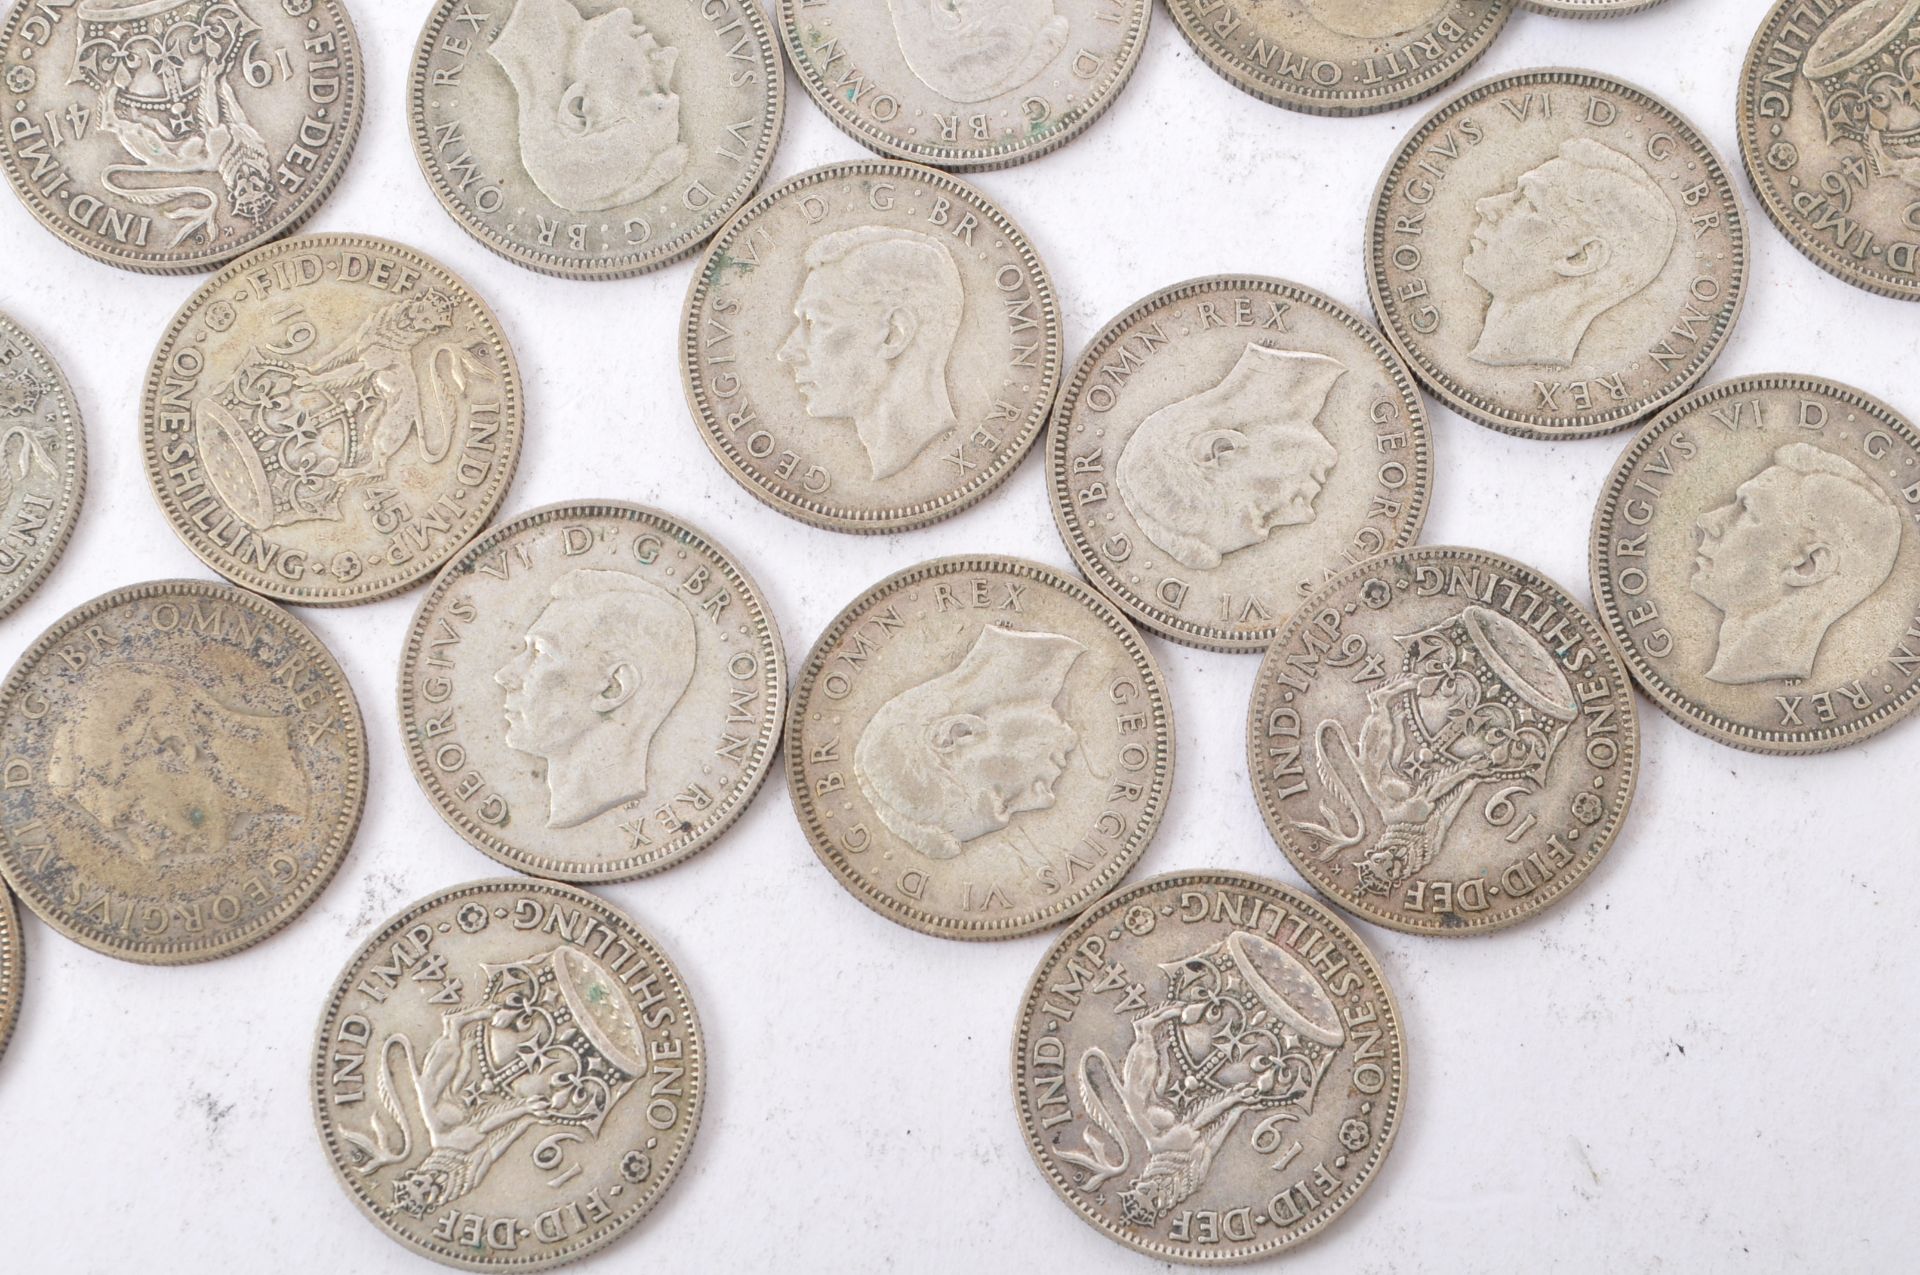 COLLECTION OF 20TH CENTURY SHILLING COINS - 322G - Image 2 of 6